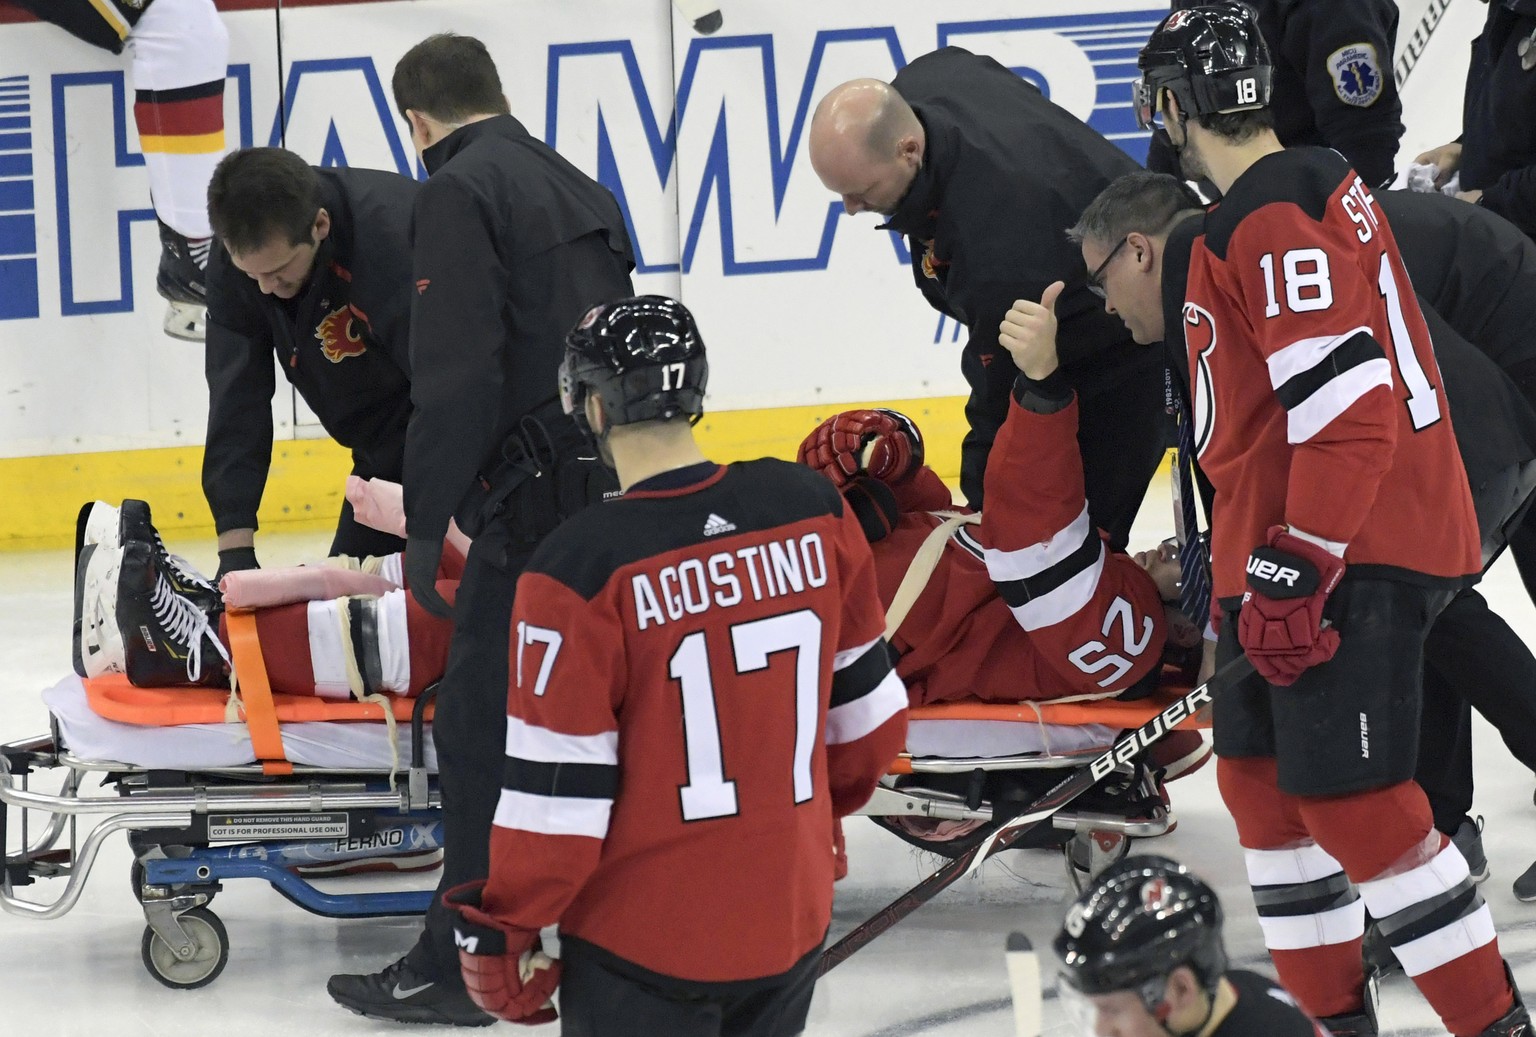 New Jersey Devils defenseman Mirco Mueller gives a thumbs-up sign as he is wheeled off the ice on a stretcher after being injured during the third period of an NHL hockey game against the Calgary Flam ...